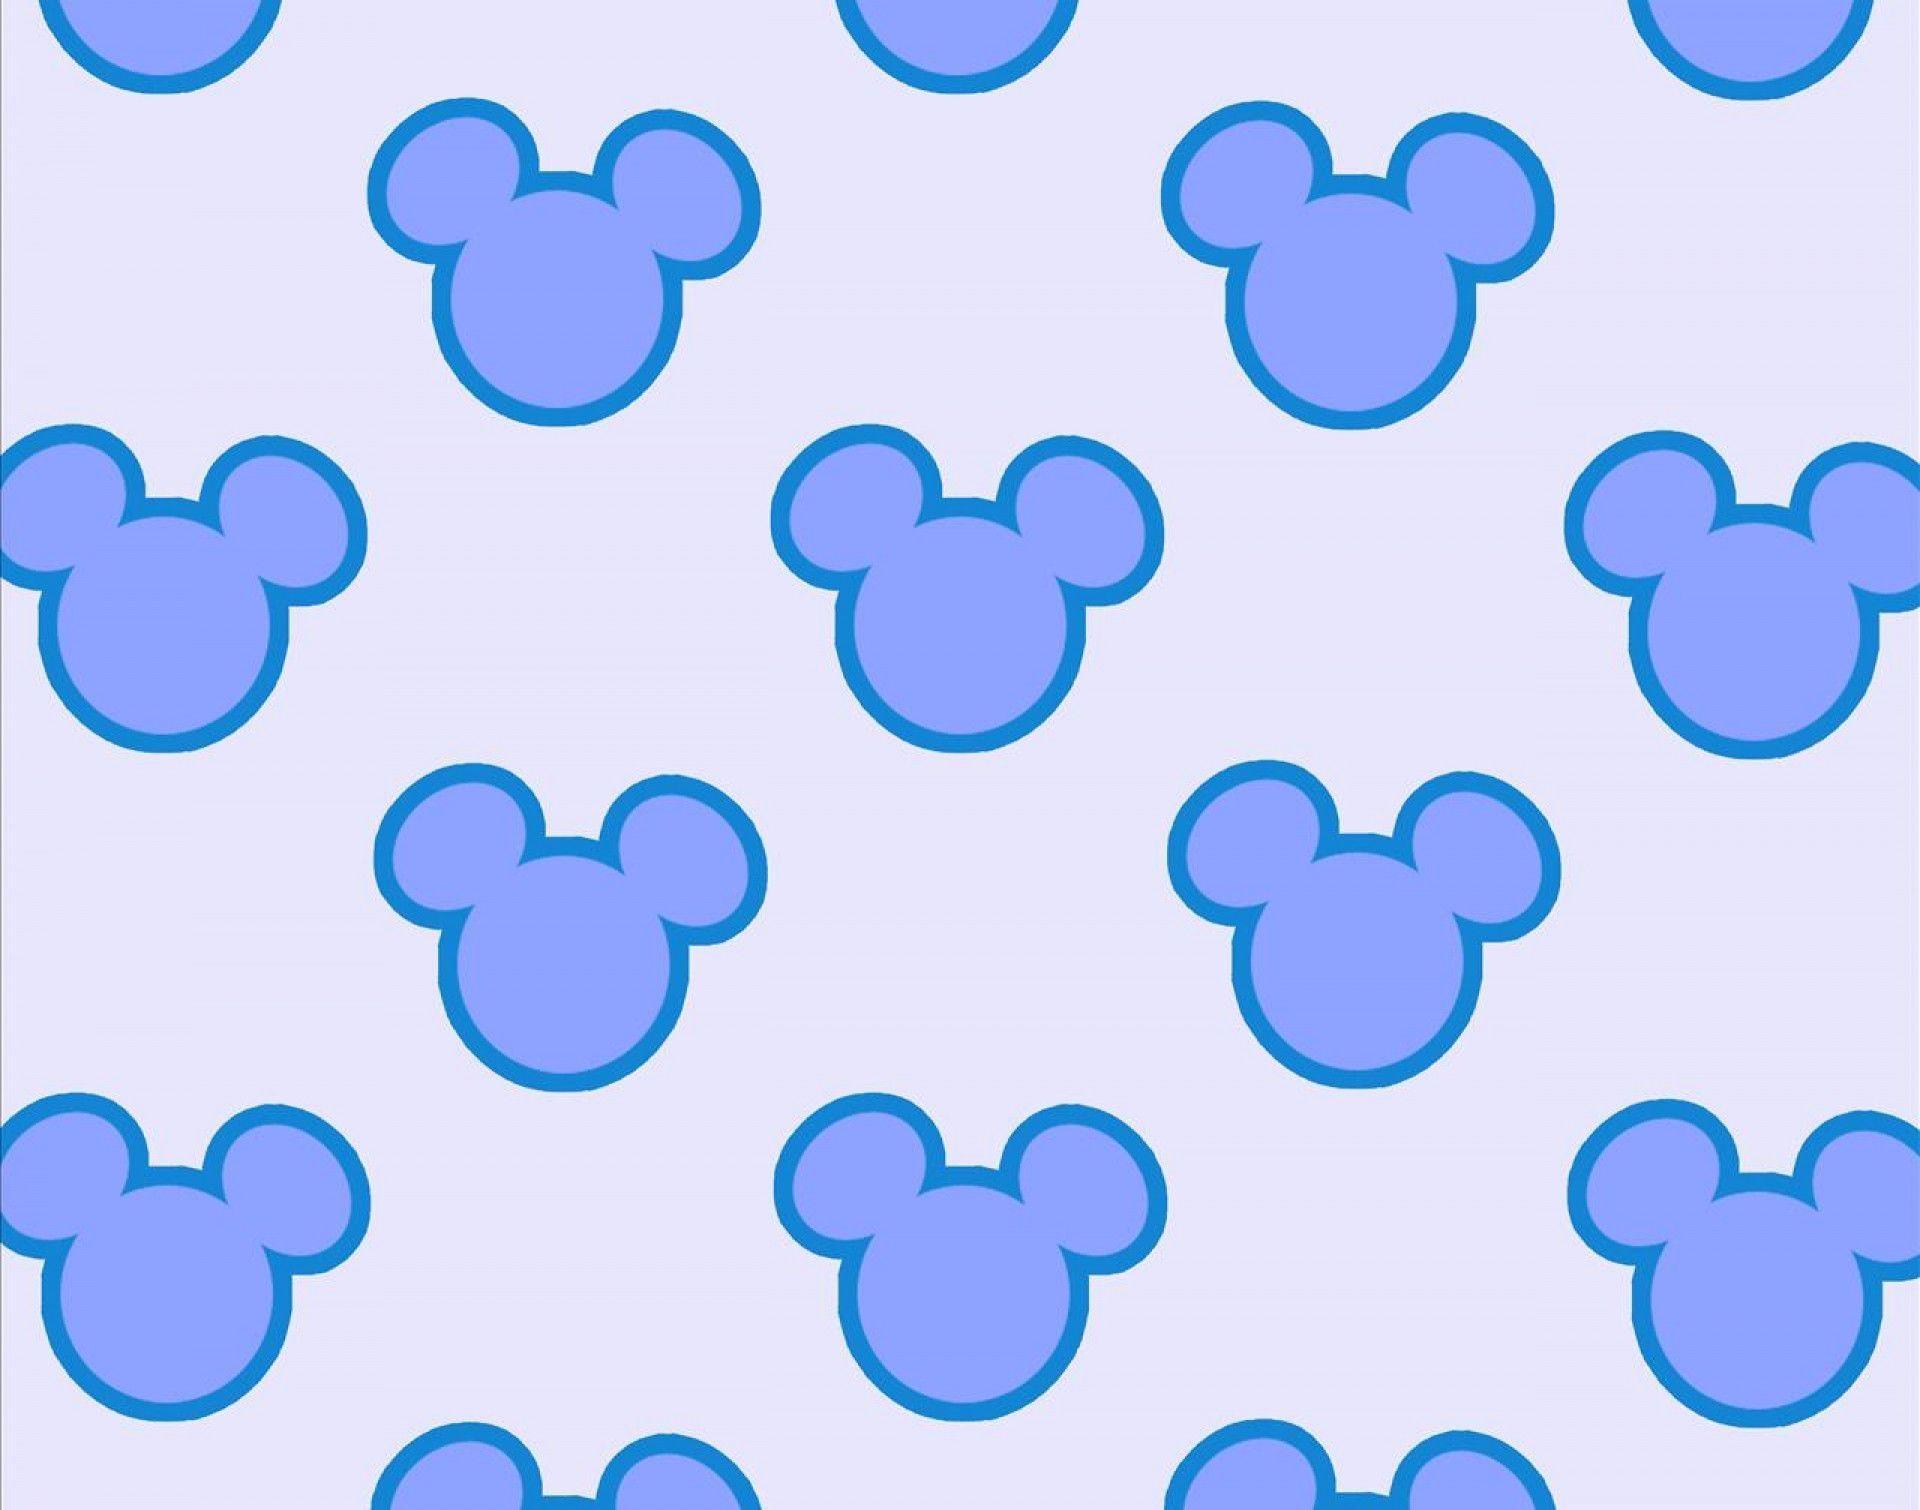 Mickey mouse HD background mickey mouse download mickey mouse hd